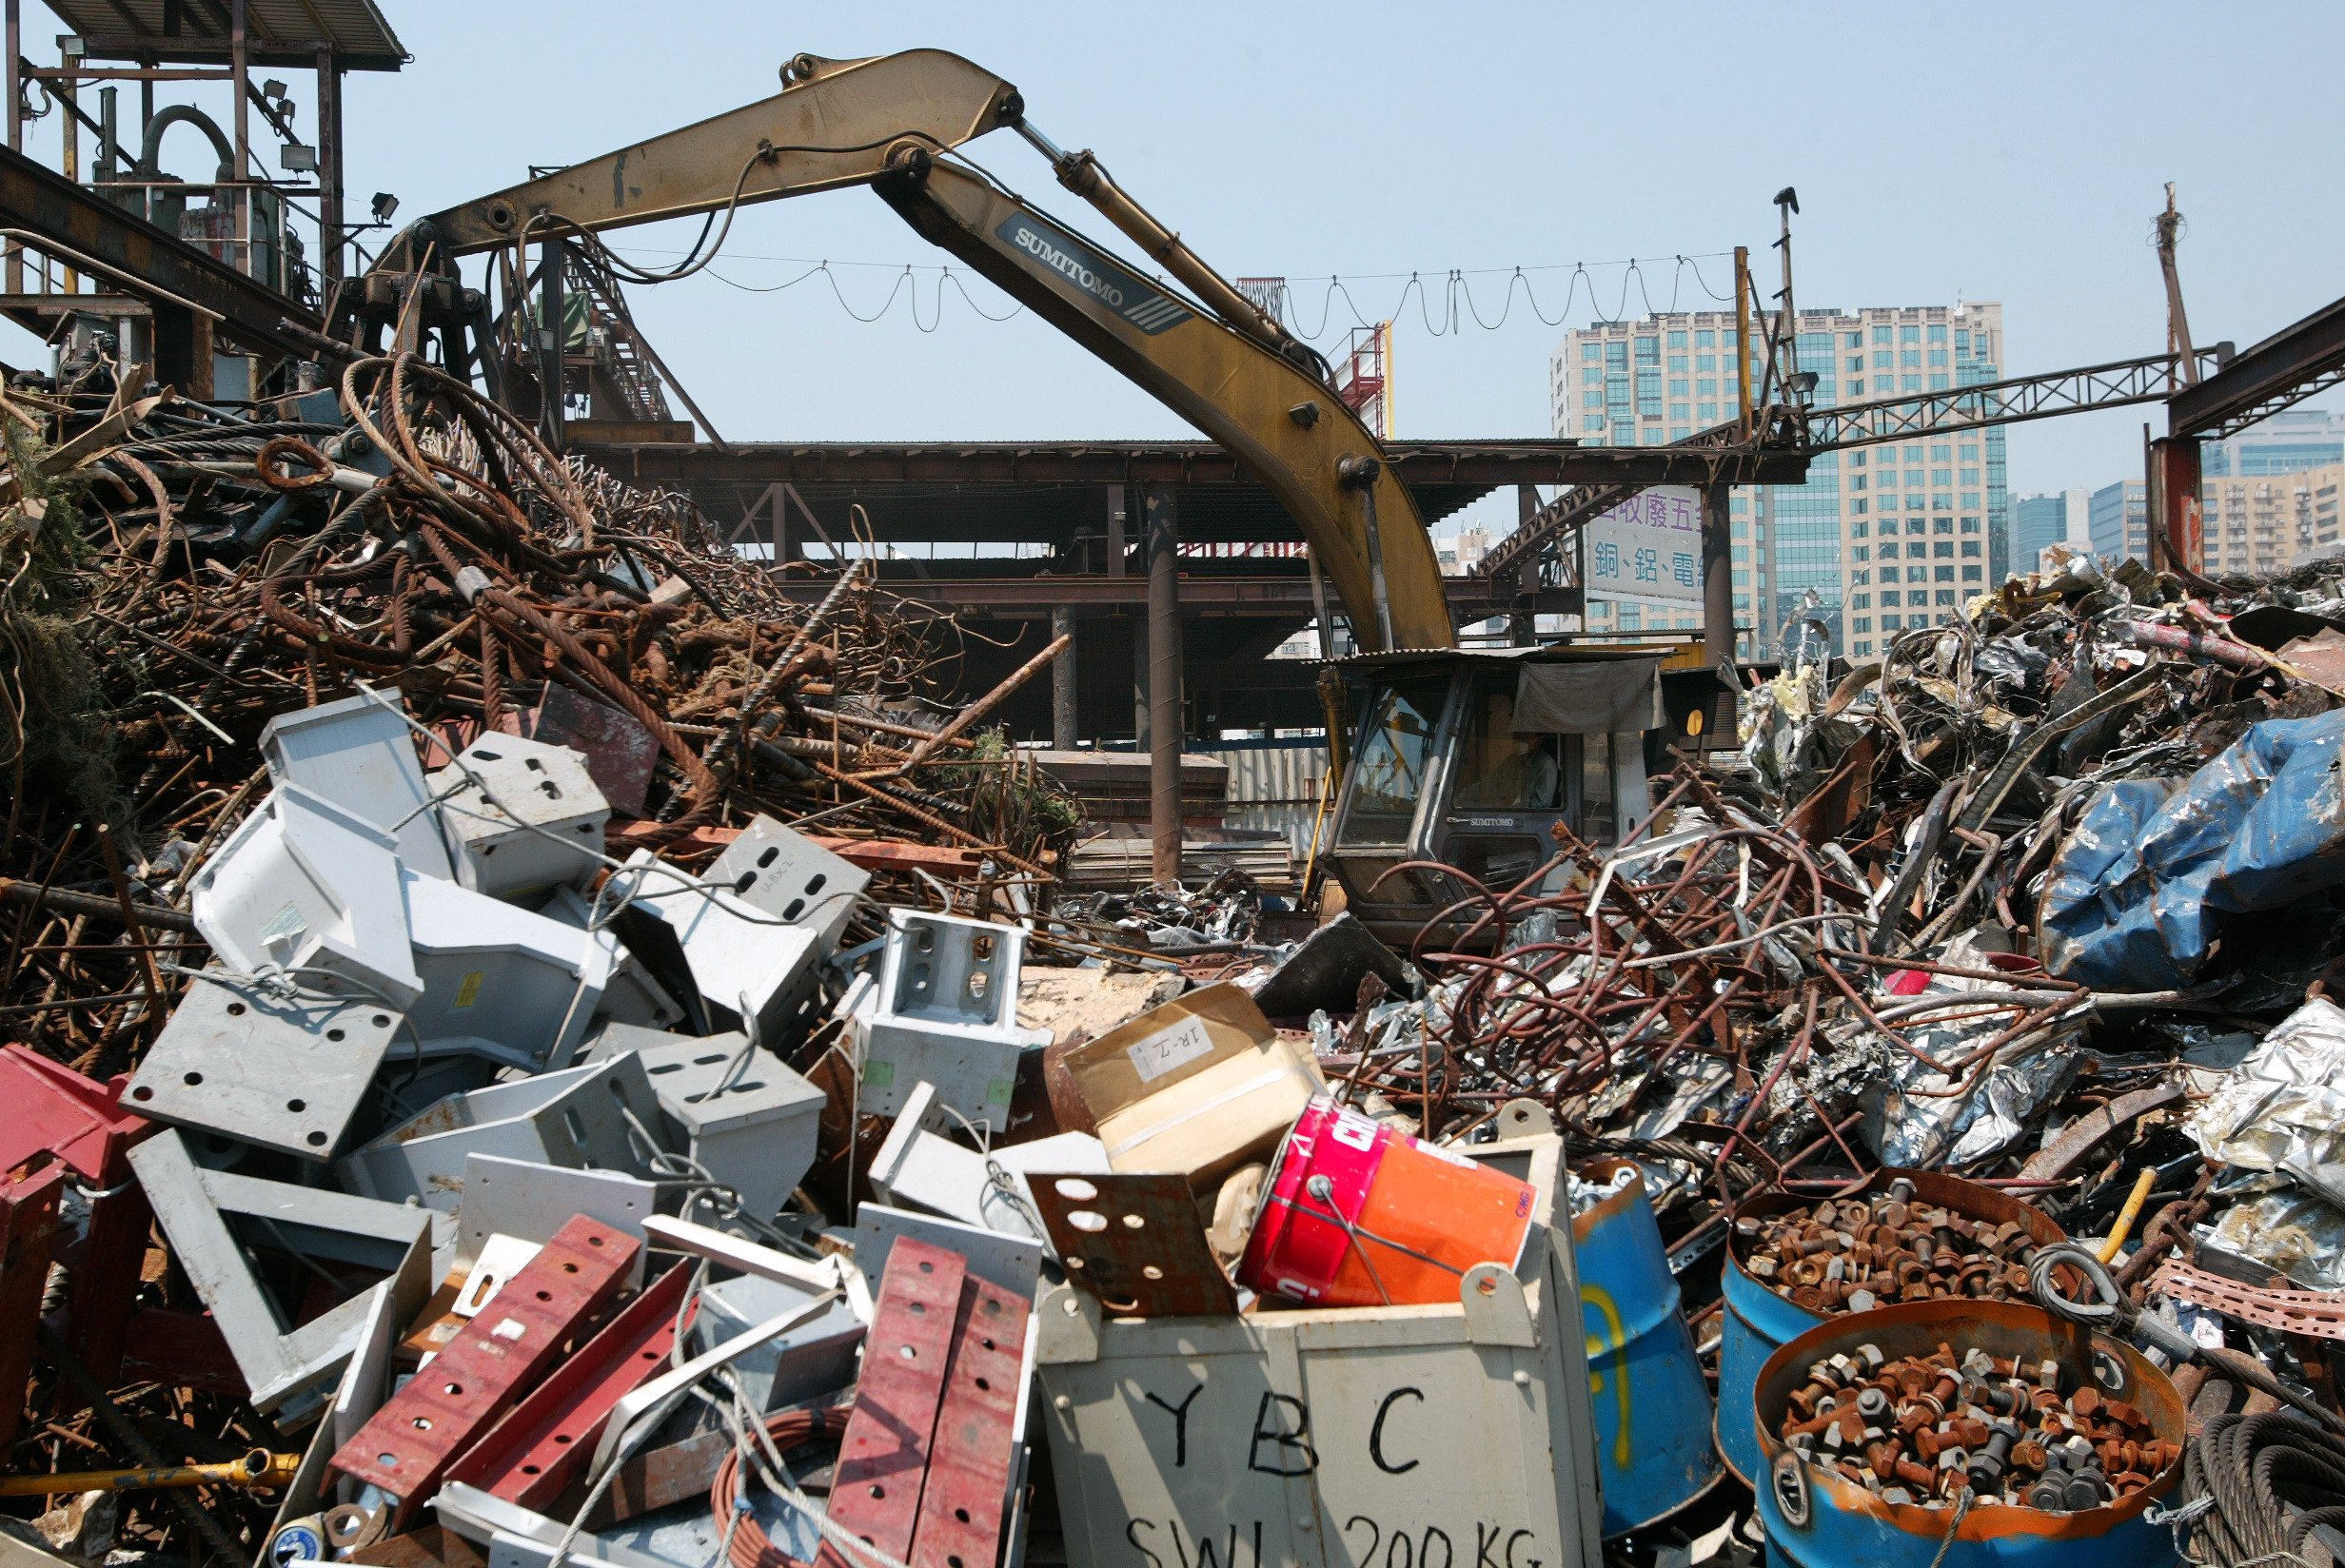 A Hong Kong branch of DBS bank, being renovated in 2004, sent old safe deposit boxes to an industrial crusher, but 83 still contained customers’ items. Photo: SCMP